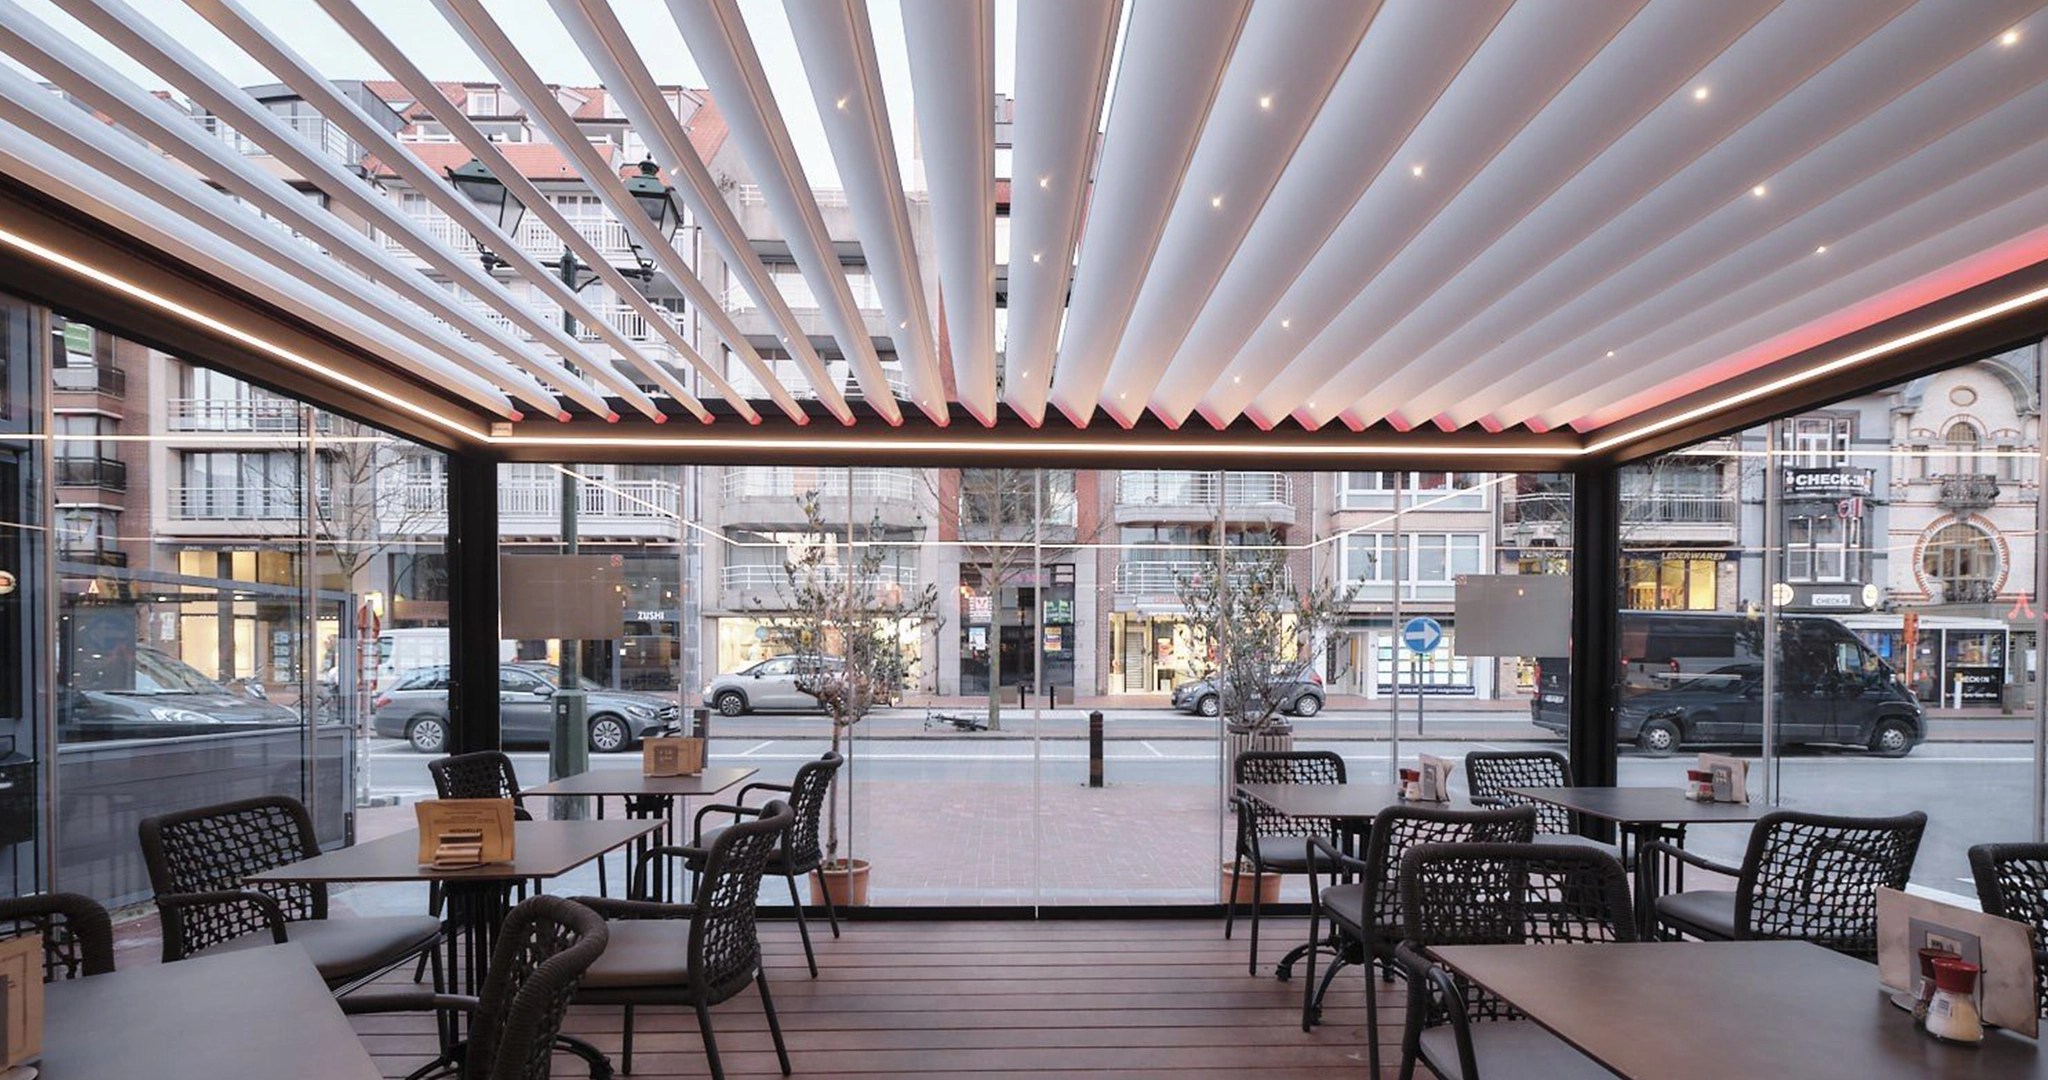 Louvred roof pergola with LED lighting adorning the front of a high-street cafe.